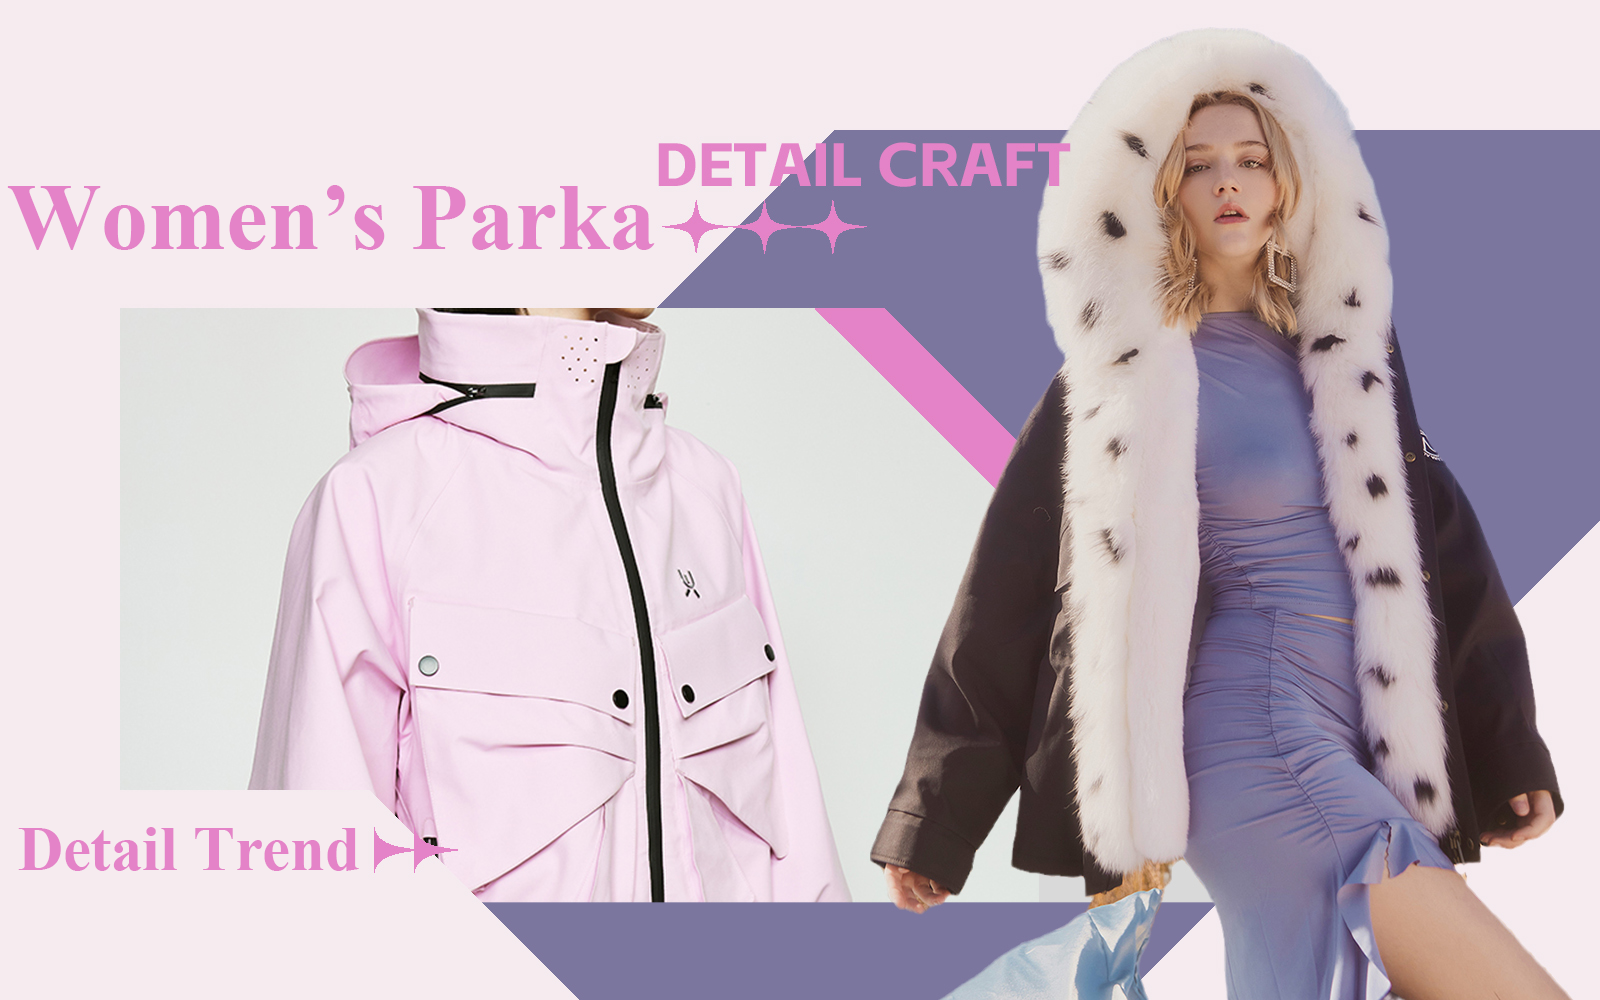 The Detail Trend for Women's Parka